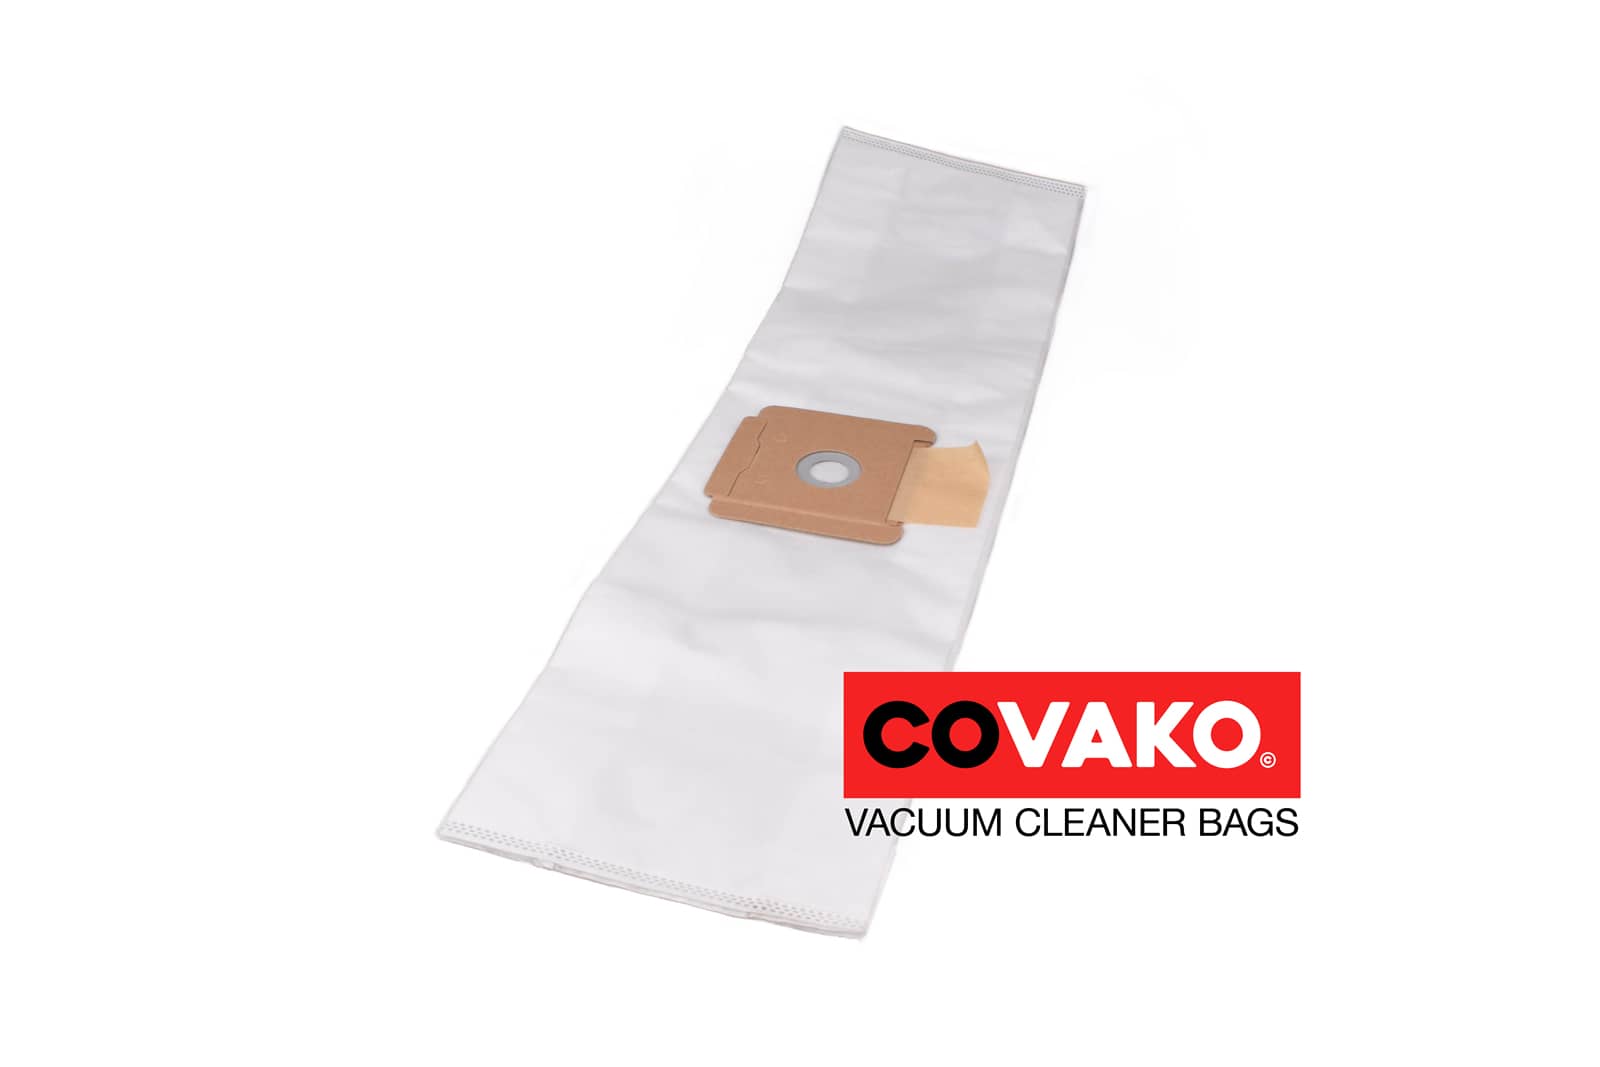 Proclean T 111 / Synthesis - Proclean vacuum cleaner bags